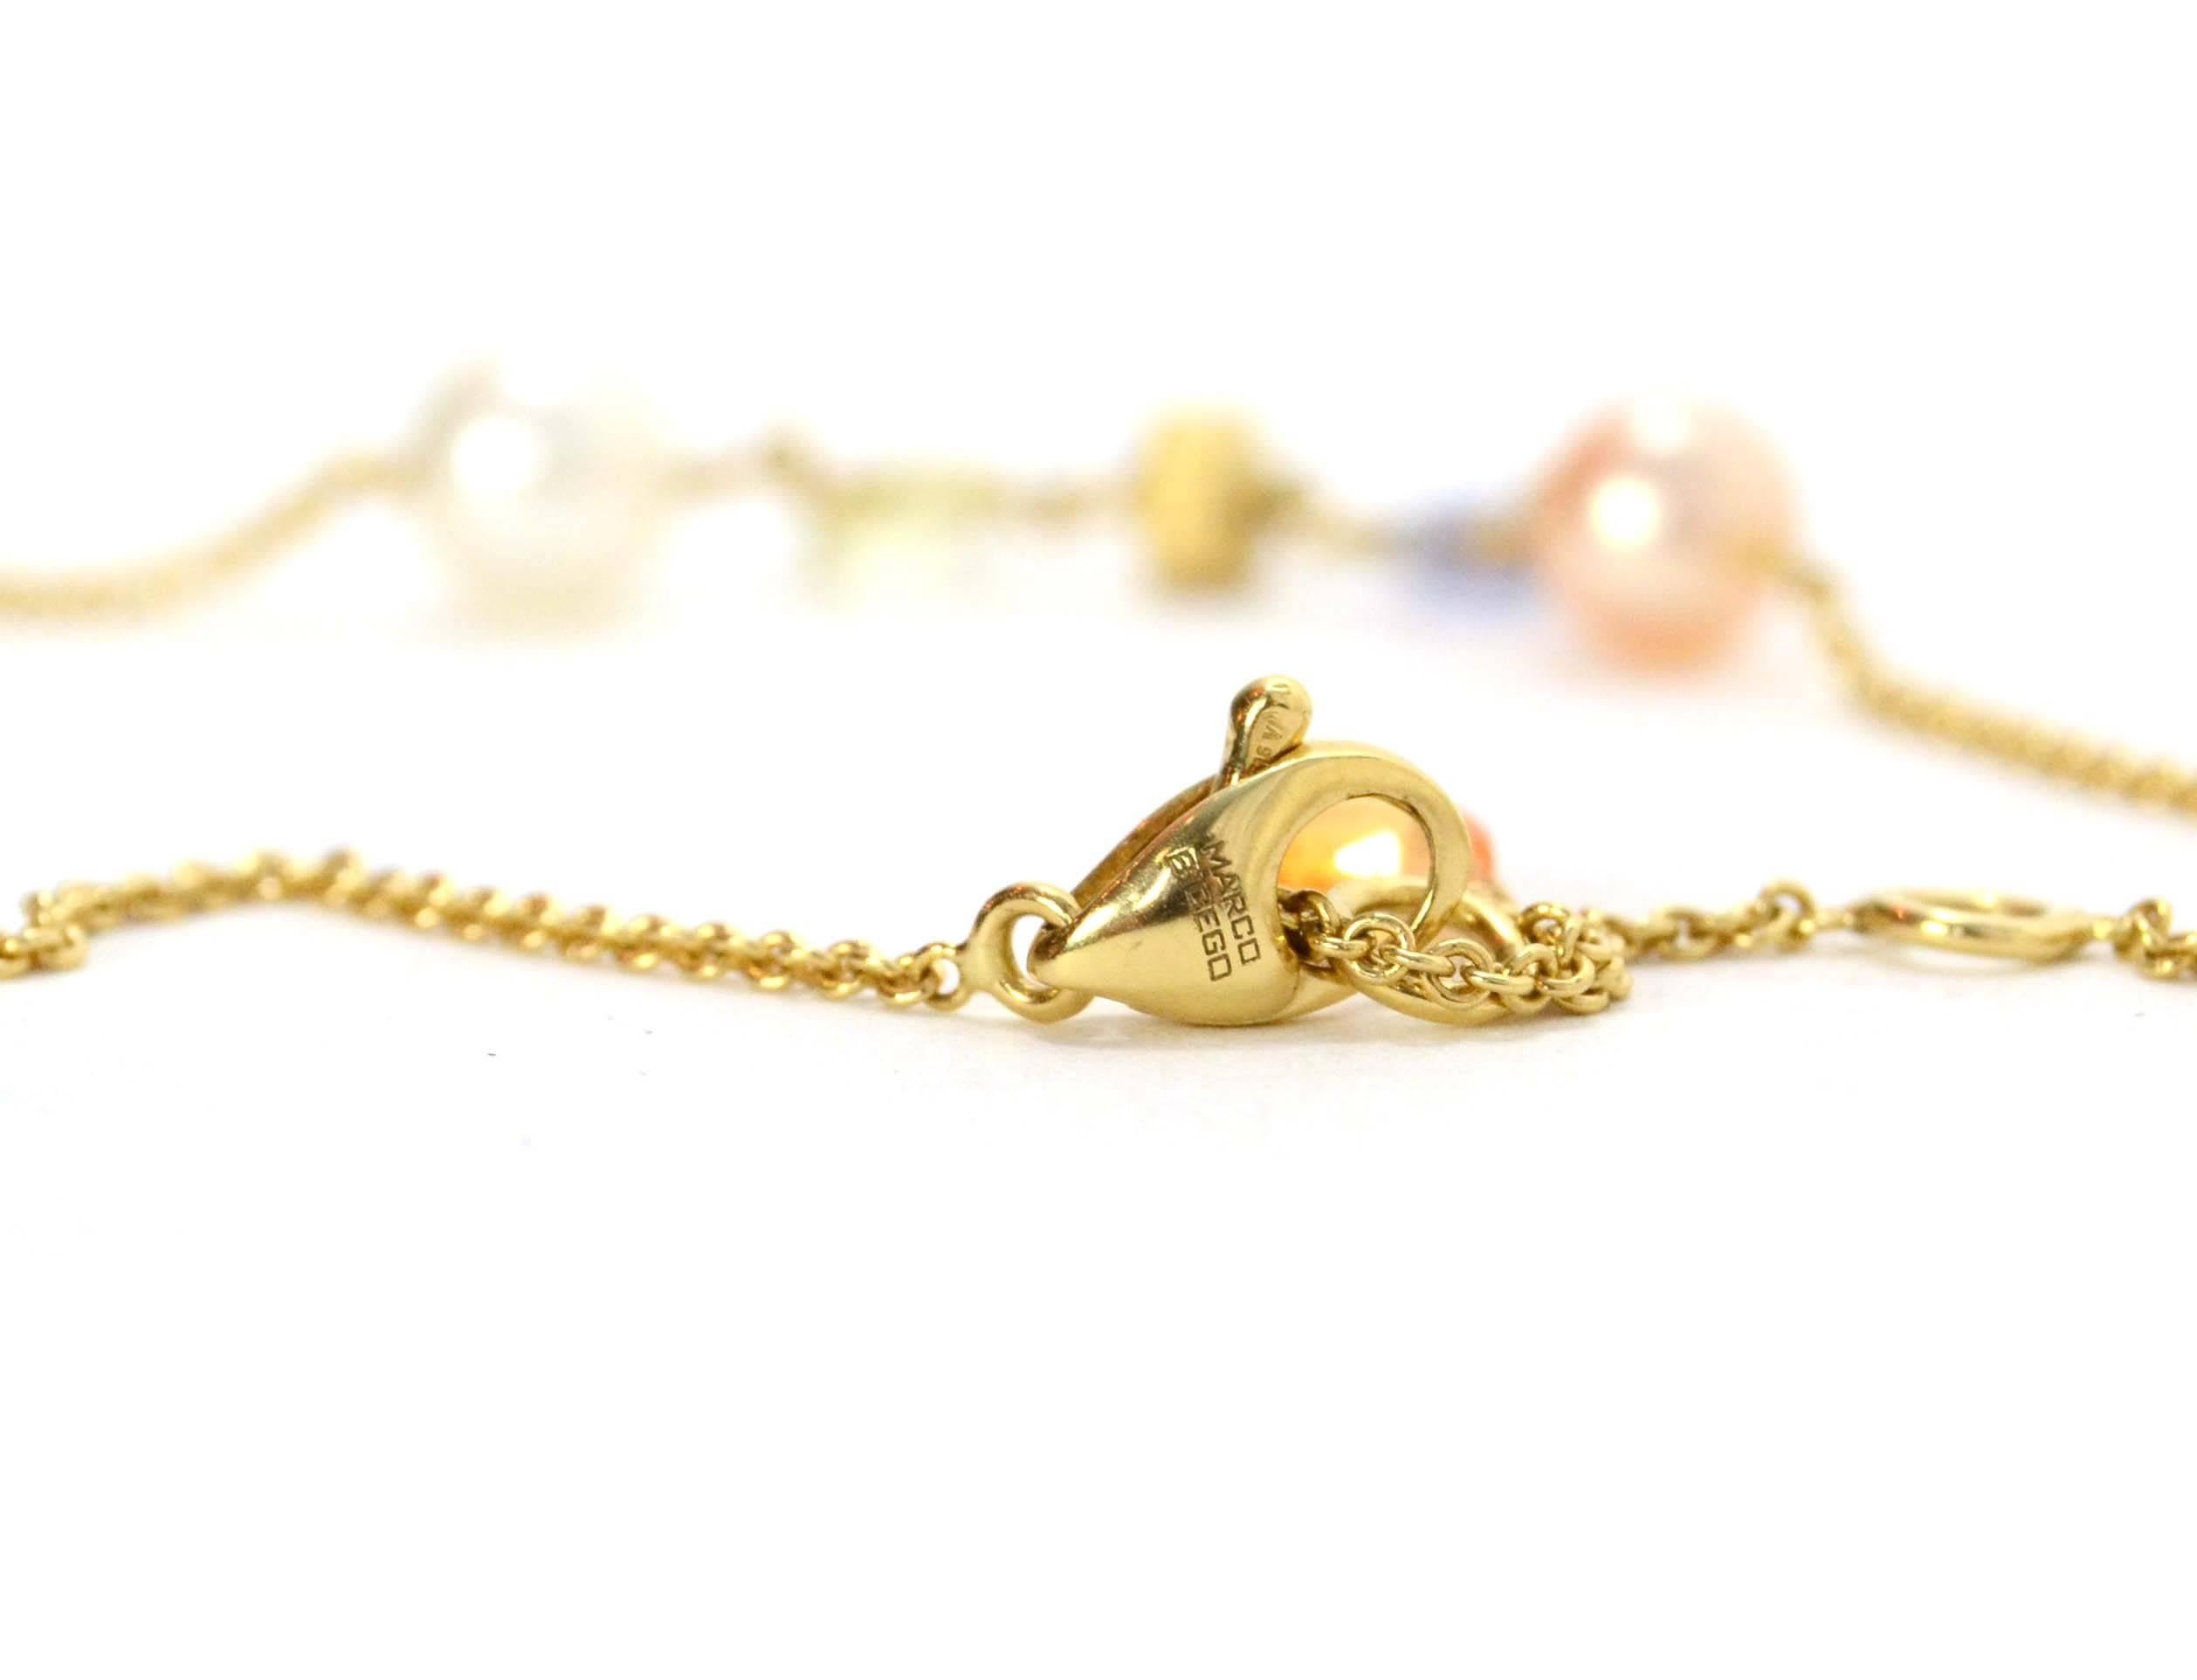 Women's Marco Bicego Multi-Colored Stone & Pearl 18k Gold Necklace